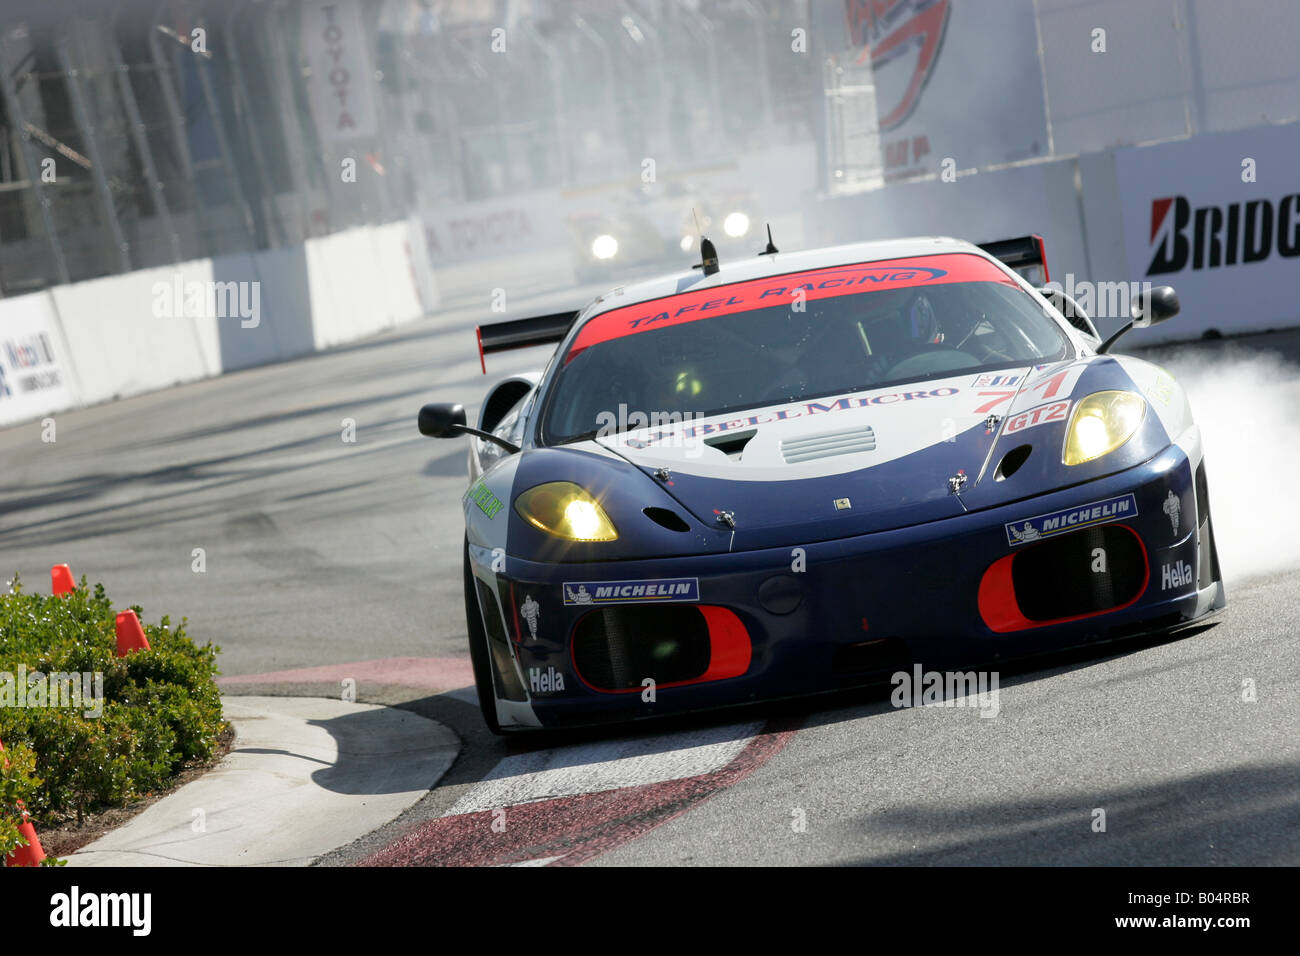 Ferrari F430  hard on the brakes in turn 2 at the American Le Mans Series race in Long Beach, California Stock Photo